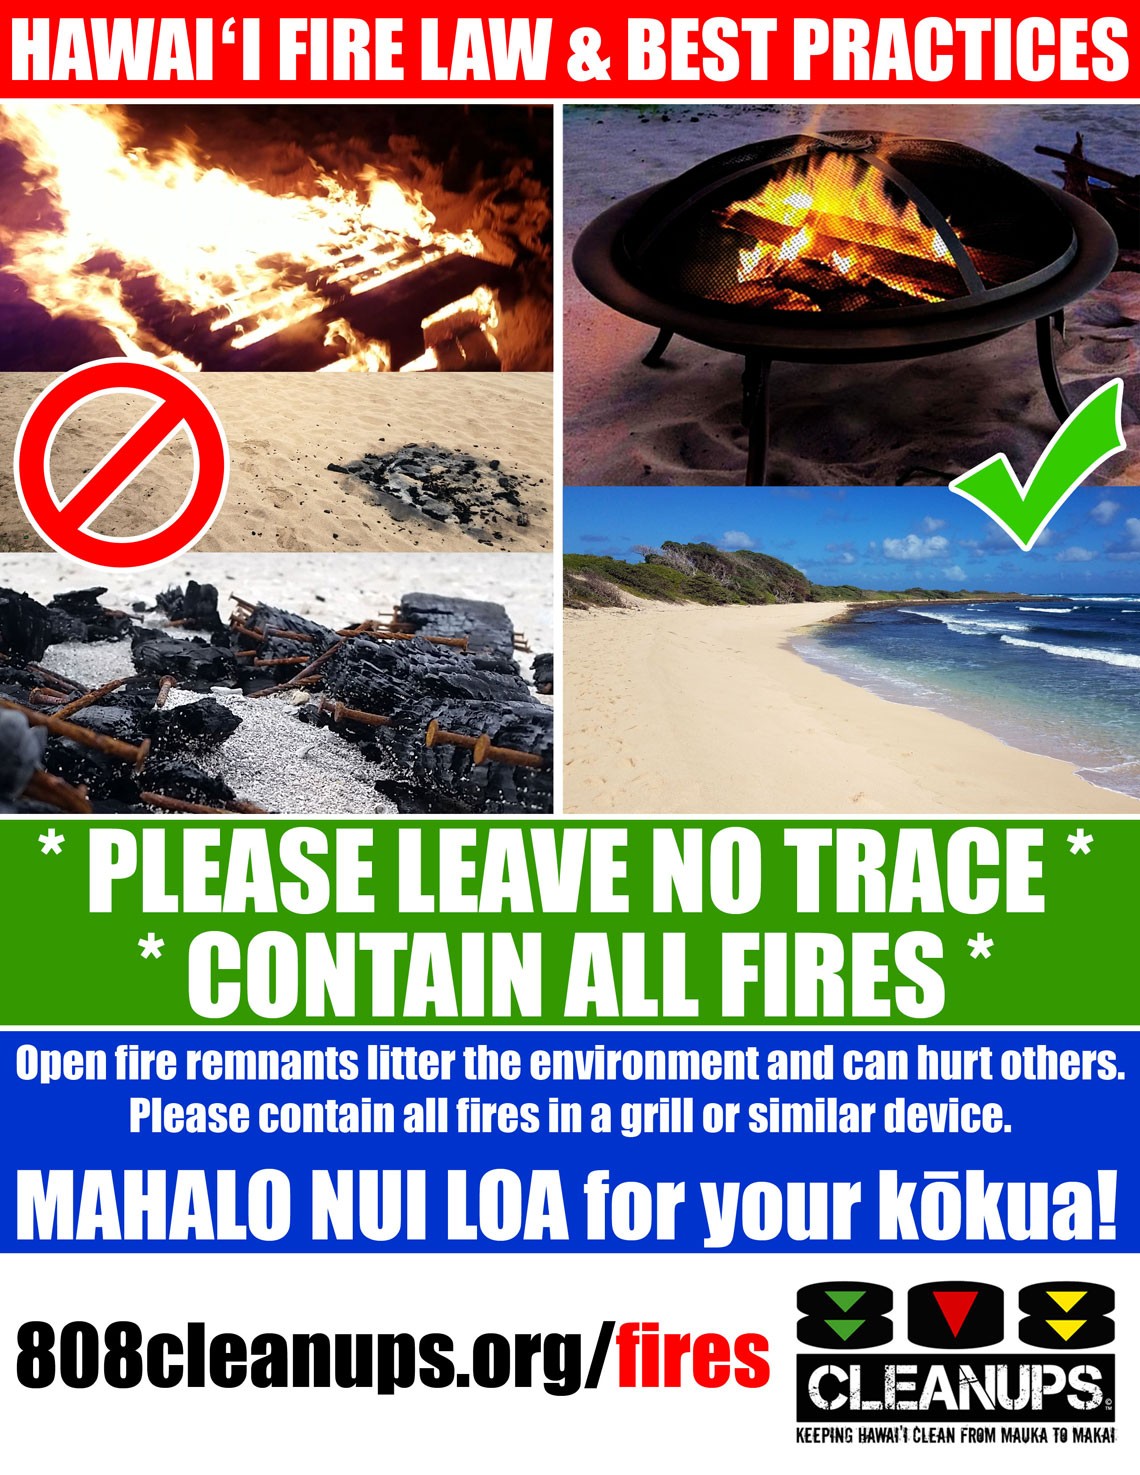 Hawaii Fire Law & Best Practices, Leave No Trace and contain all fires.